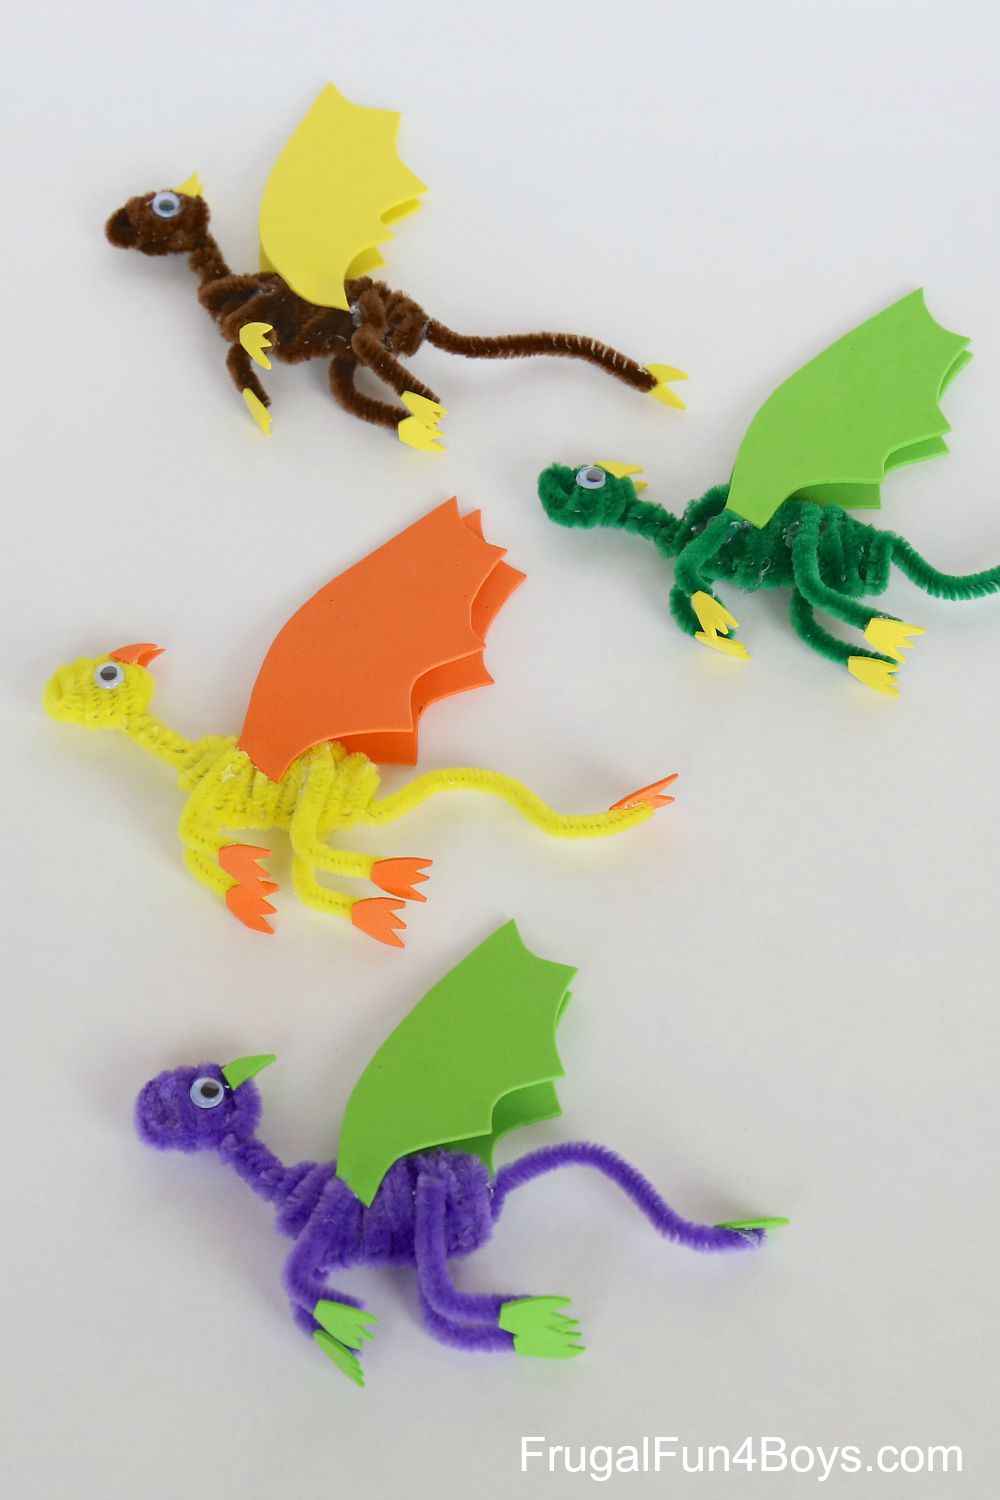 Pipe Cleaner Dragons